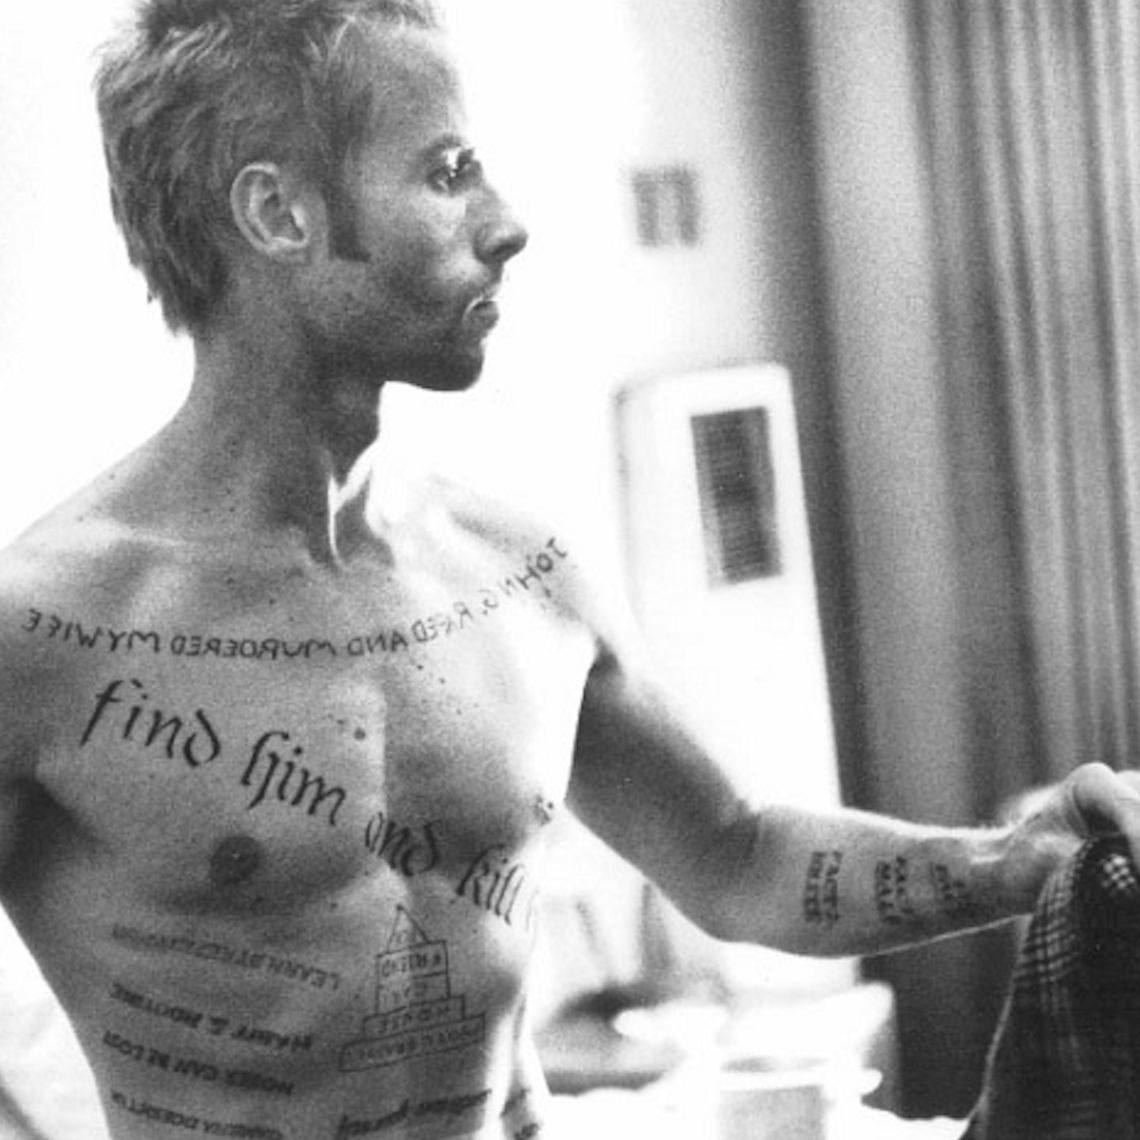 Guy Pierce as Leonard Shelby featuring a number of text-based tattoos on his torso and arms